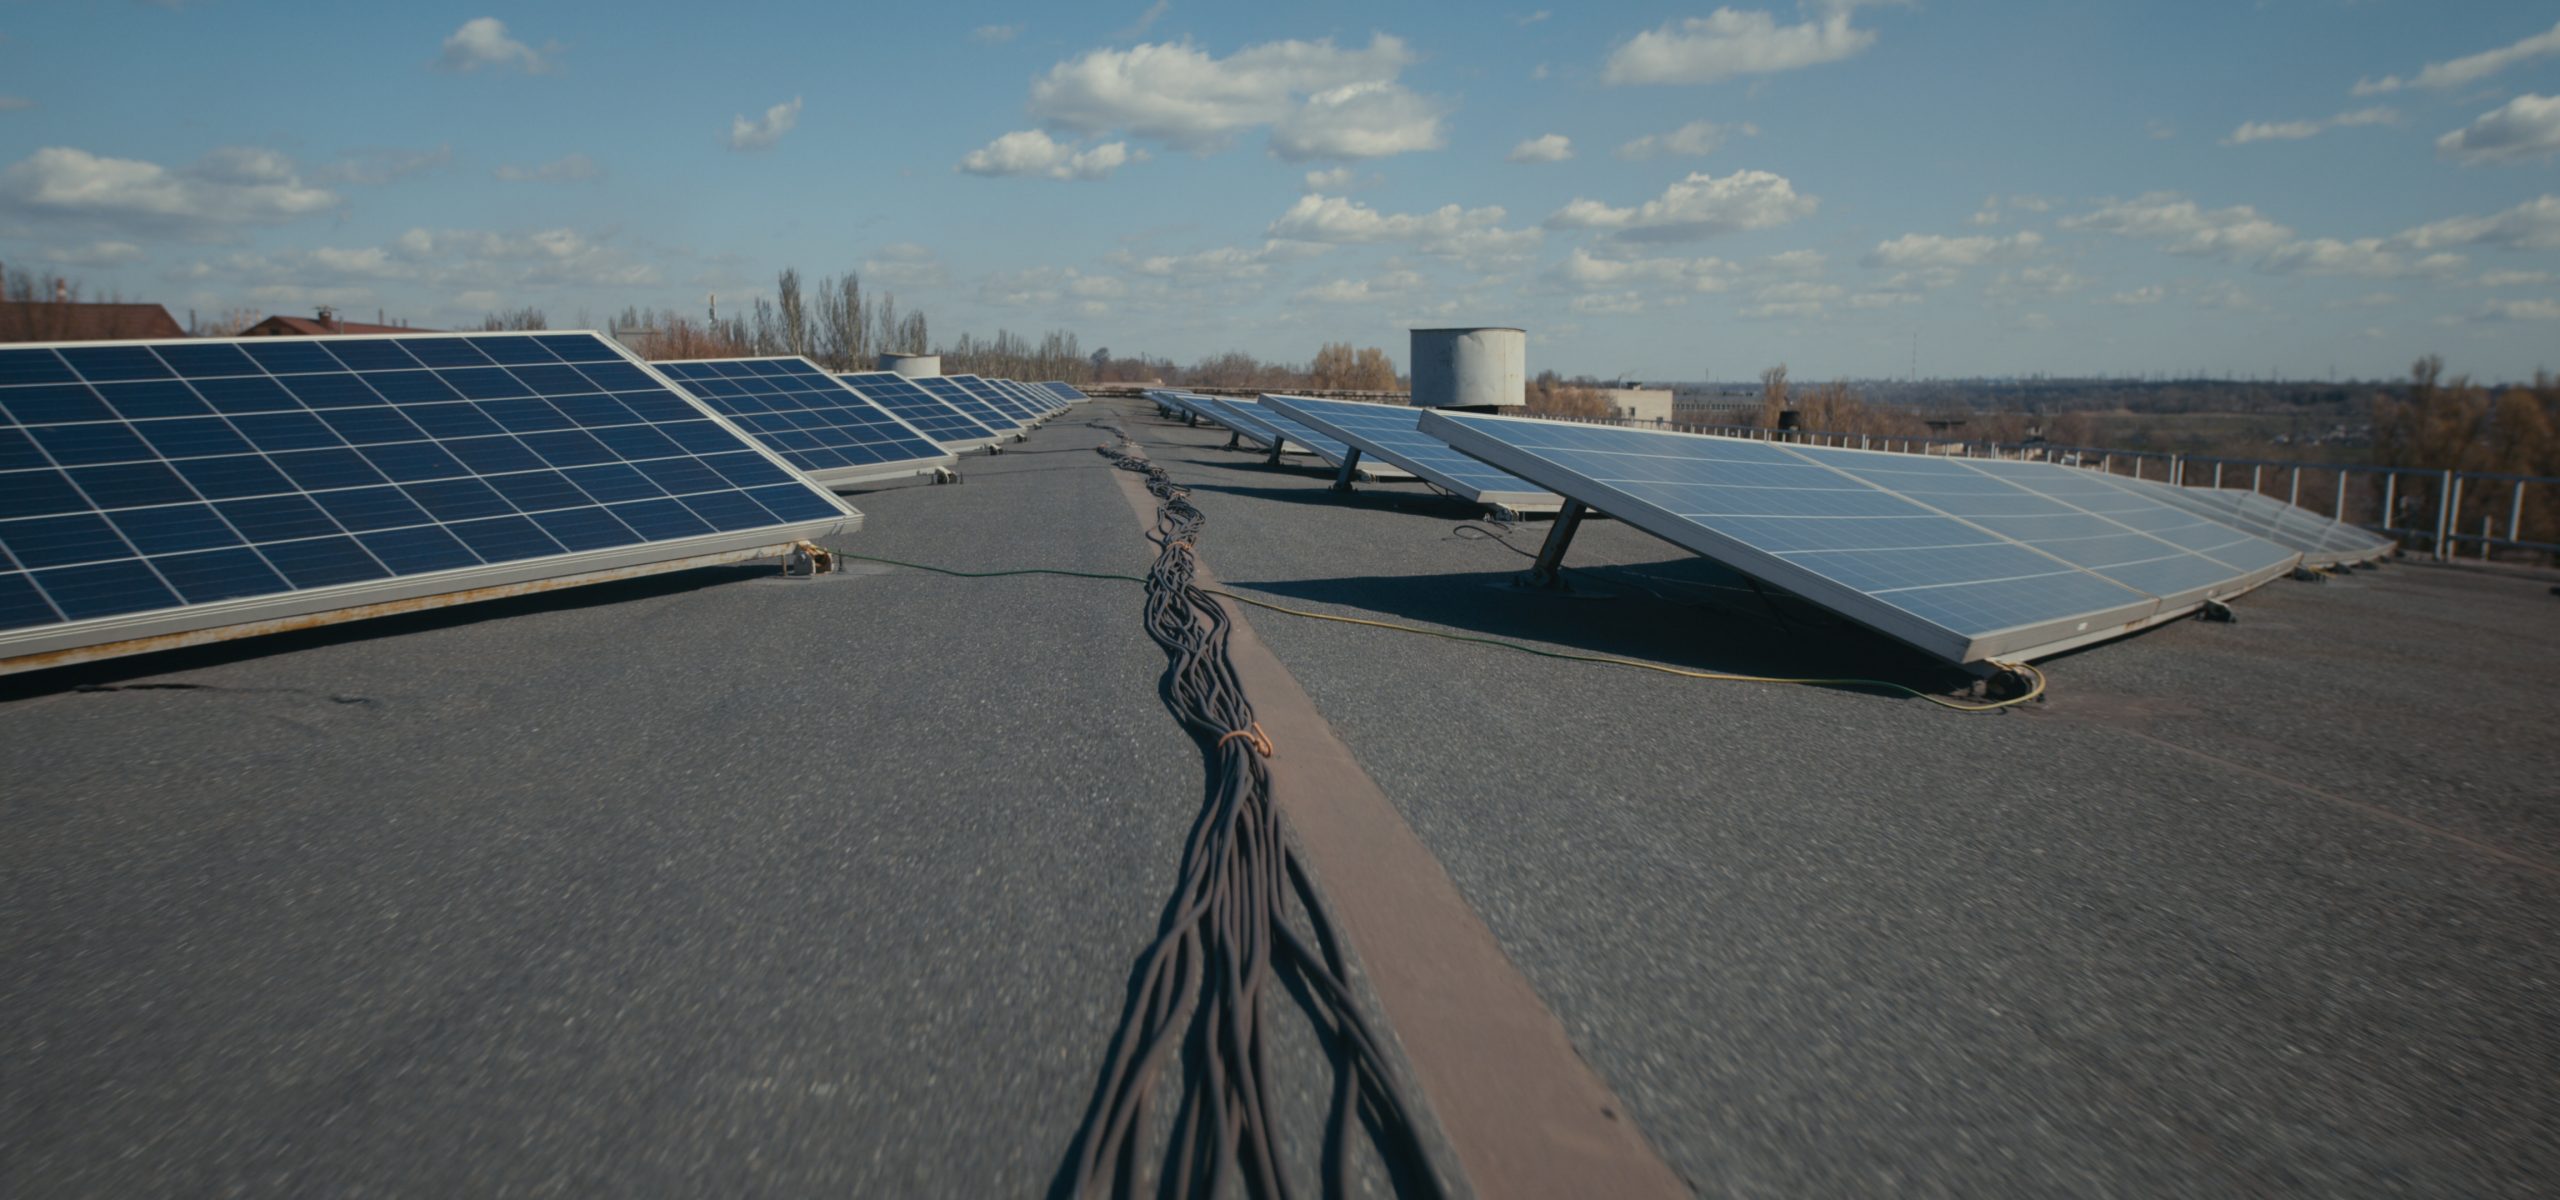 Solar Panels on Roofs- From a Roofers Perspective